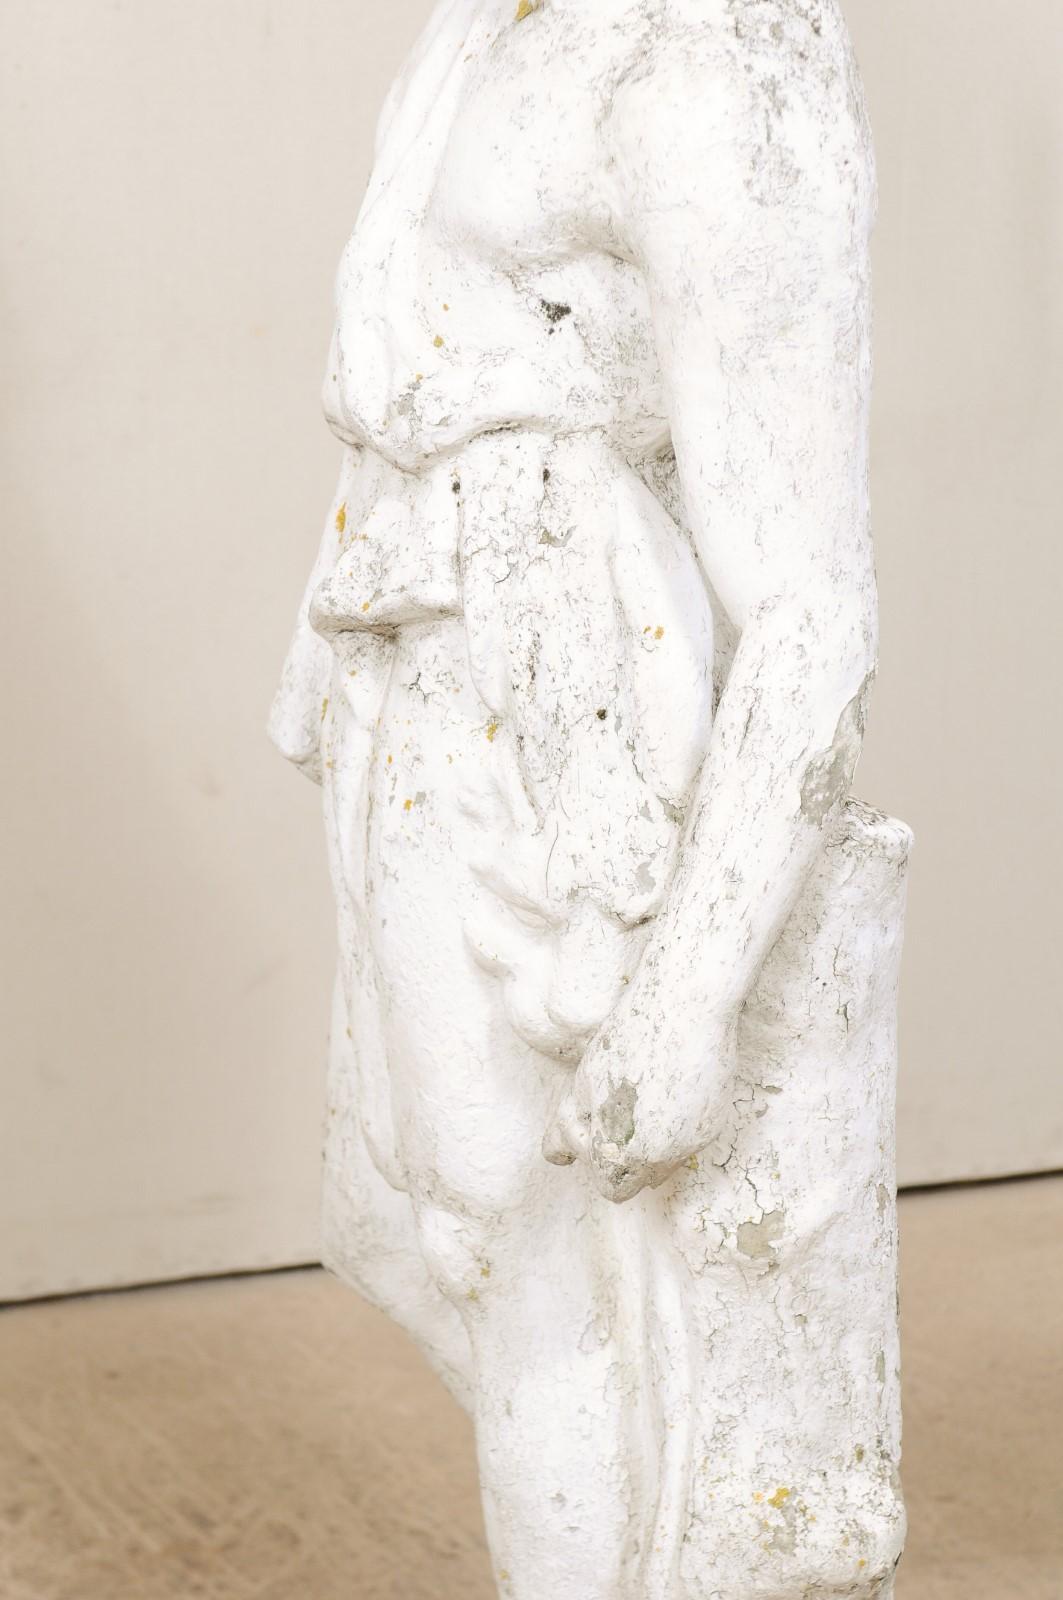 Classical Tall French Garden Sculpture of Male Figure from Early 20th Century For Sale 2